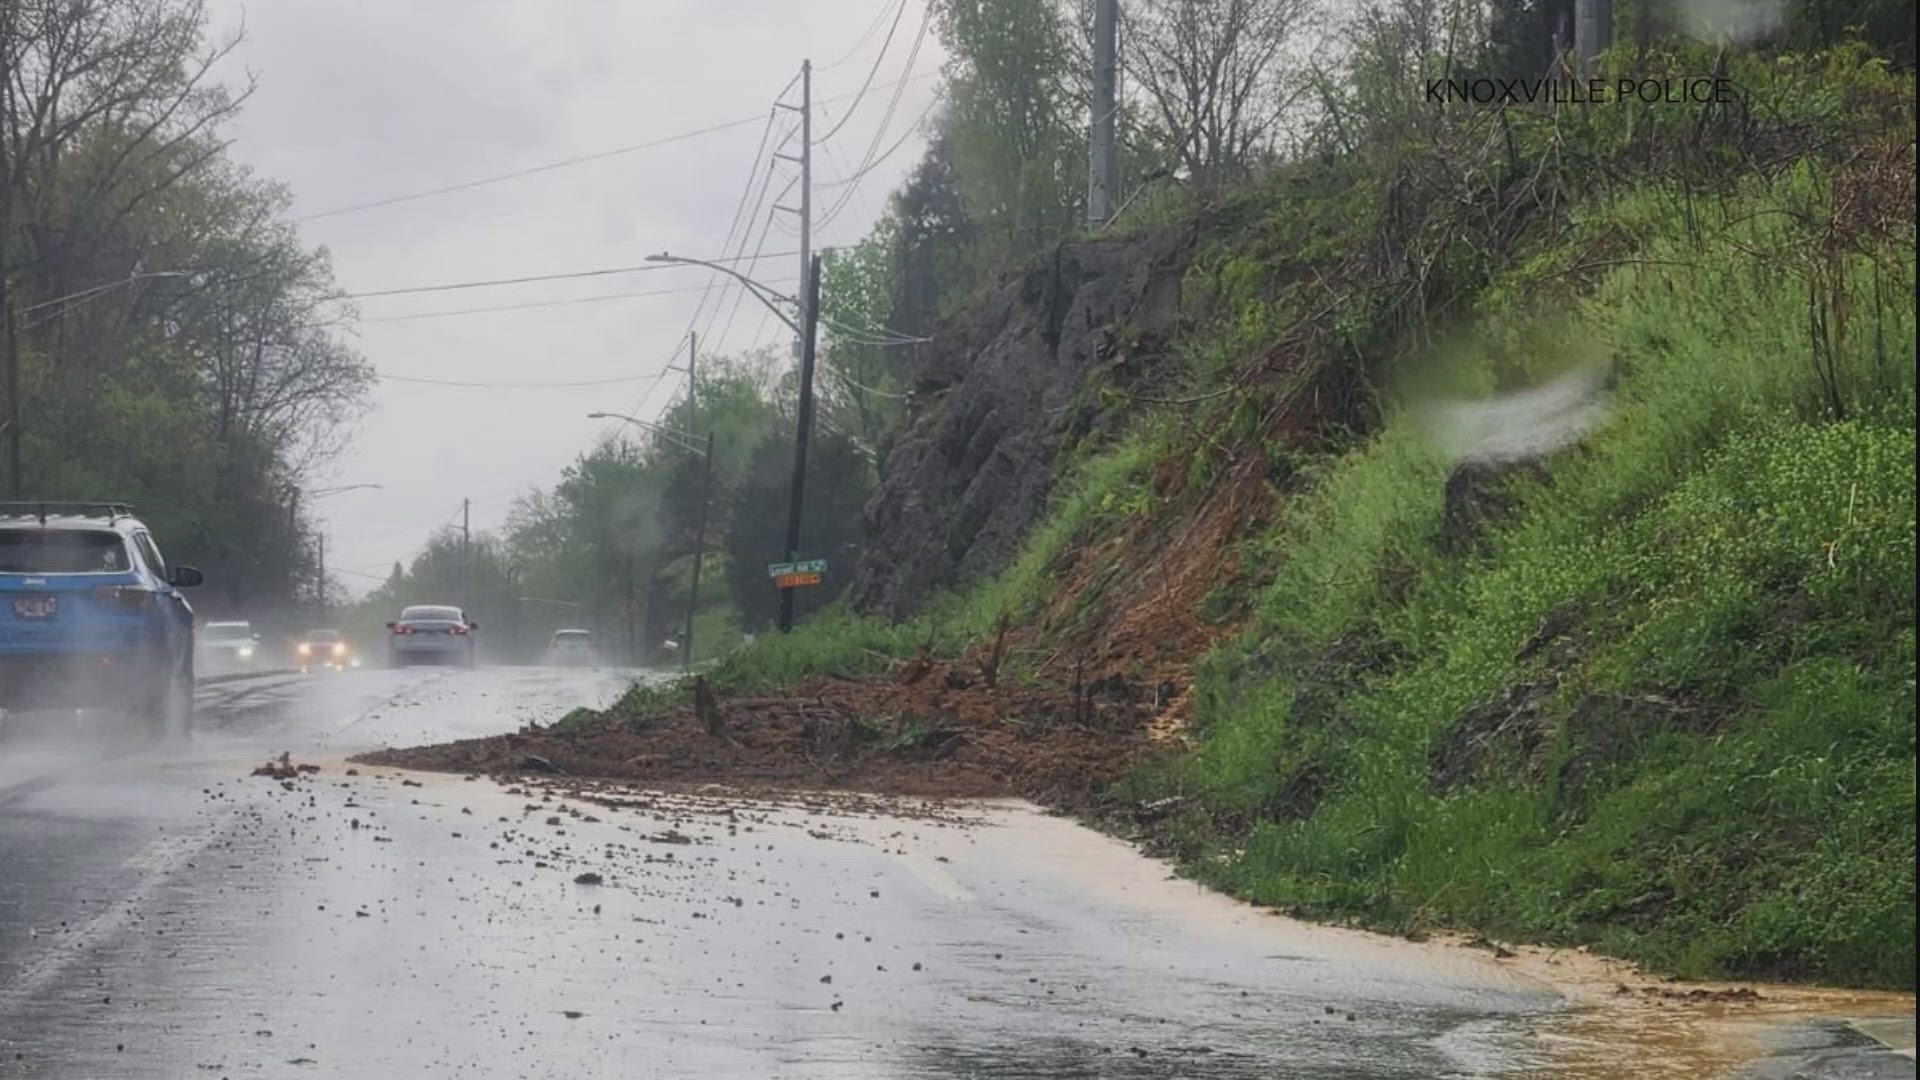 The hill collapsed into the north bound lanes of Chapman Highway at East Red Bud Road.